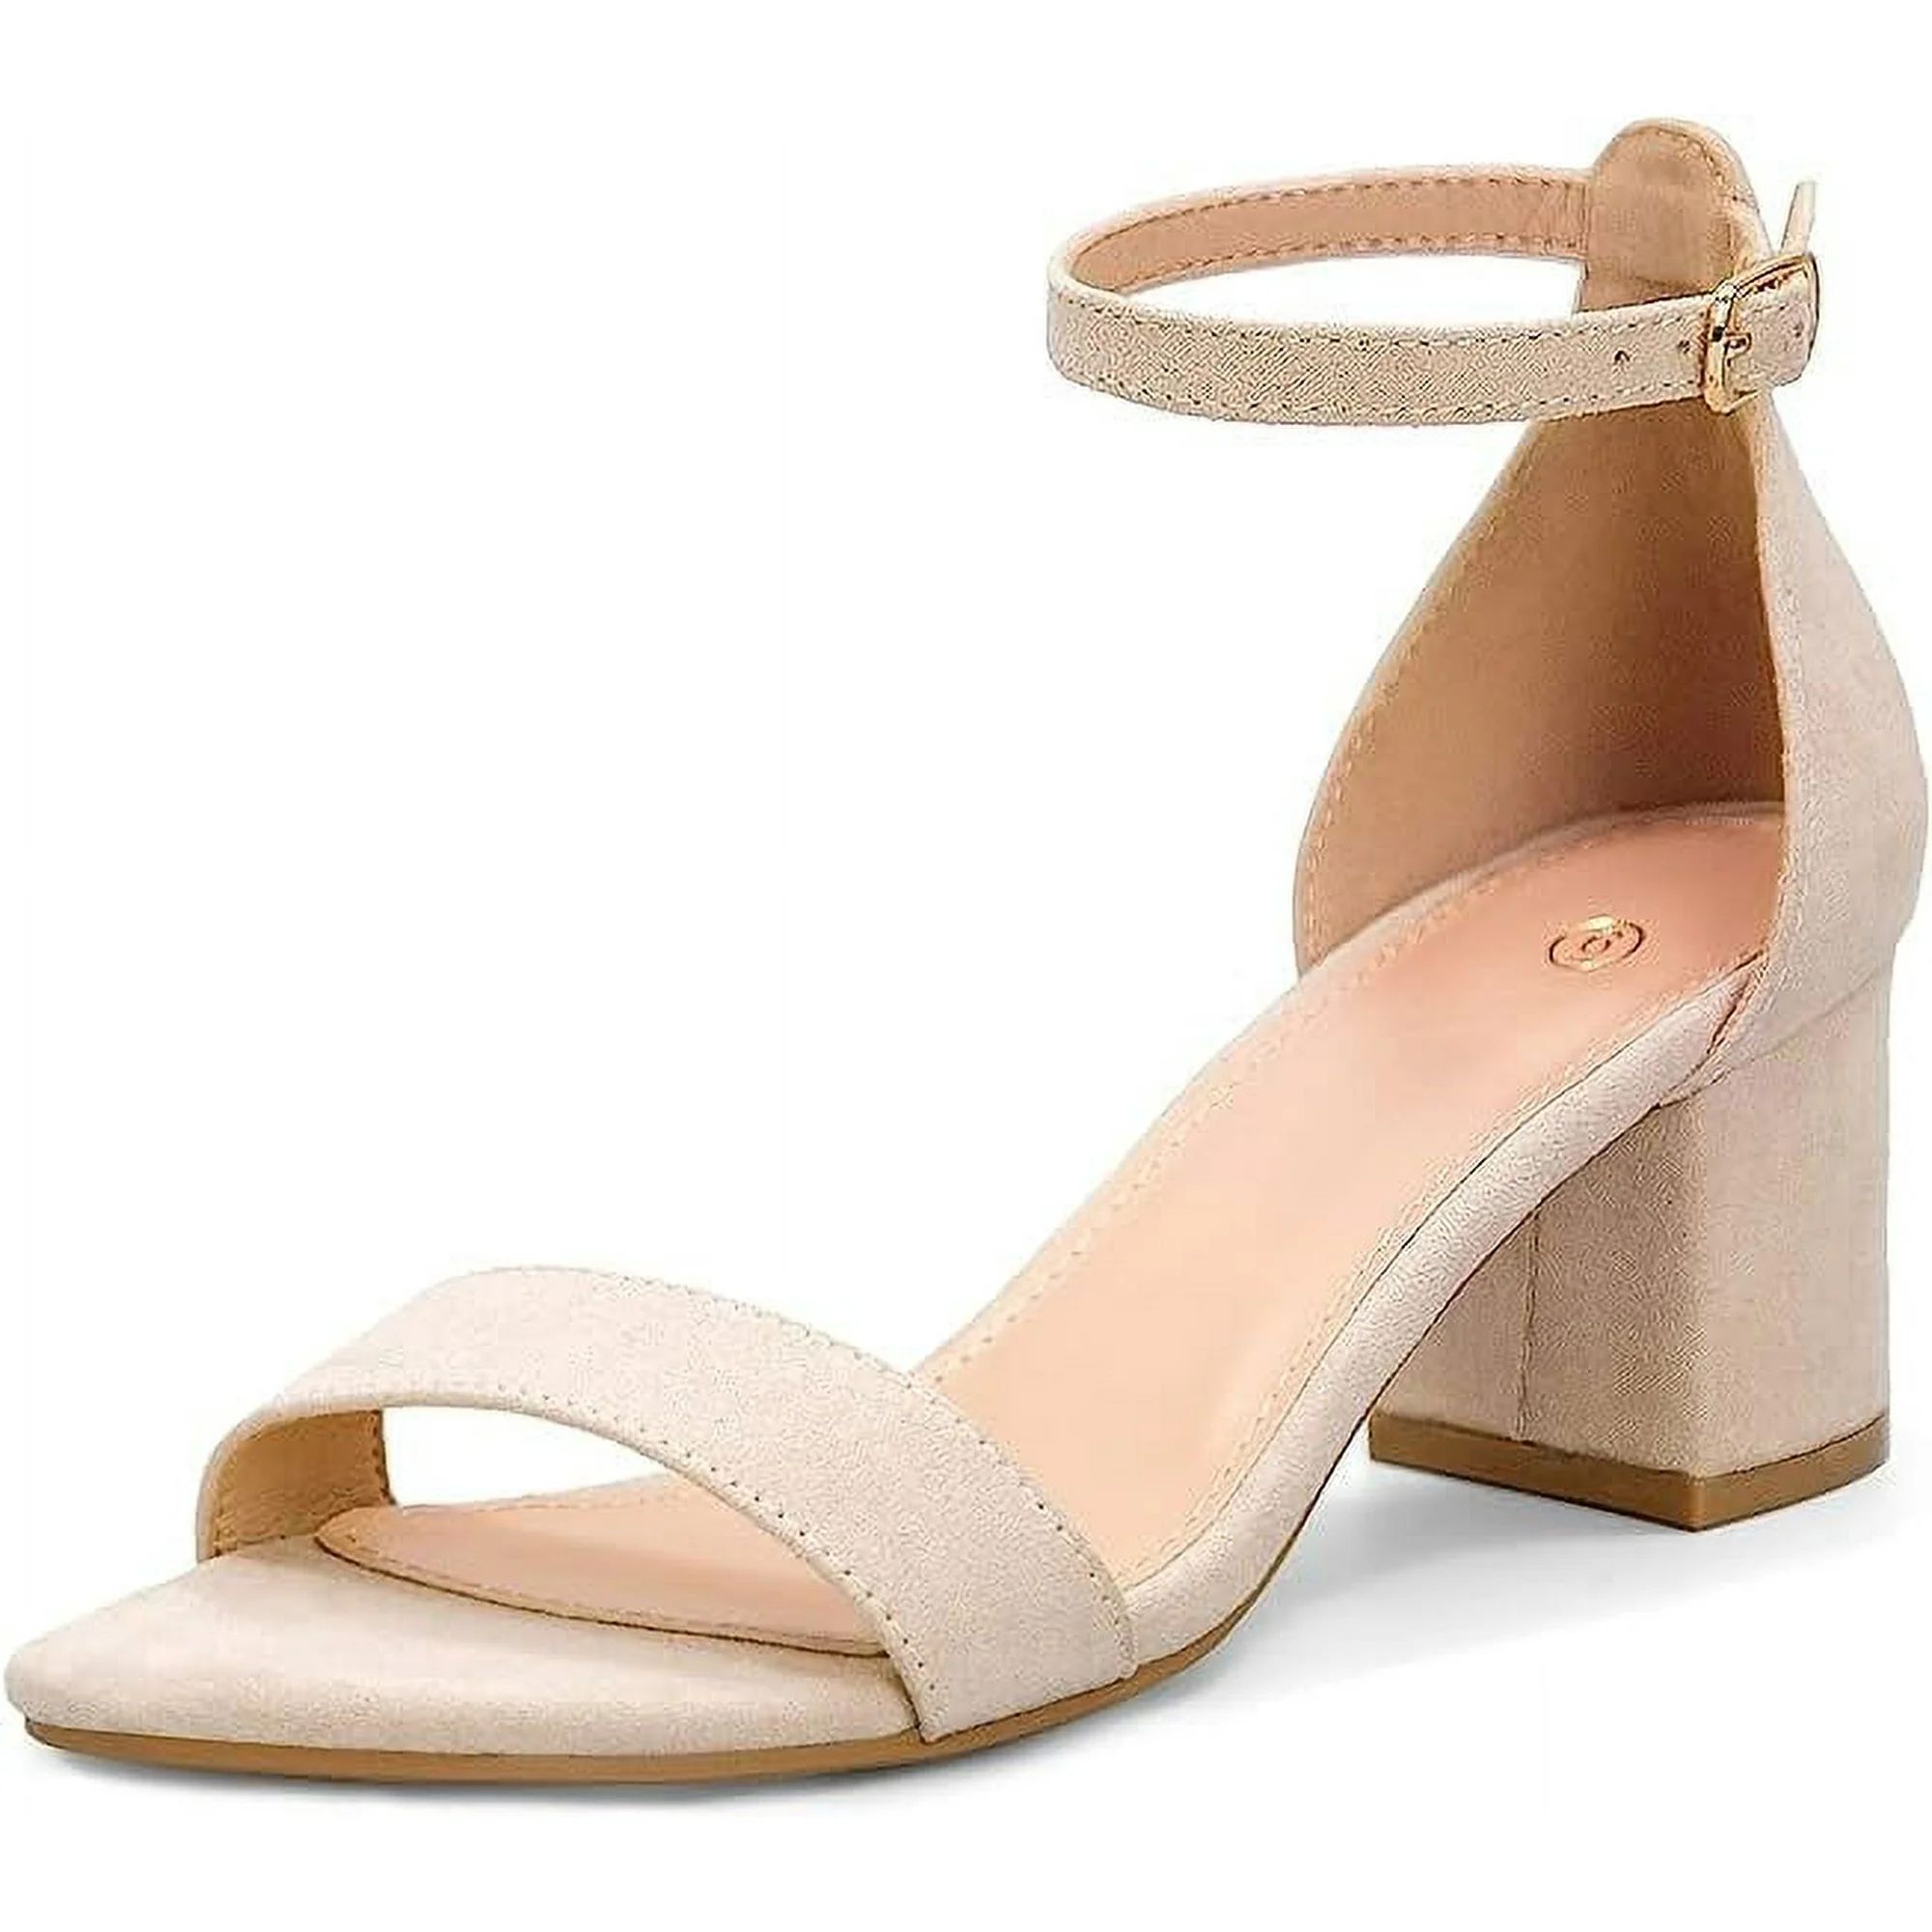 Pennysue Women's Chunky Low Heels Sandals Nude Suede Ankle Strap Wedding Shoes 7.5M | Walmart (US)